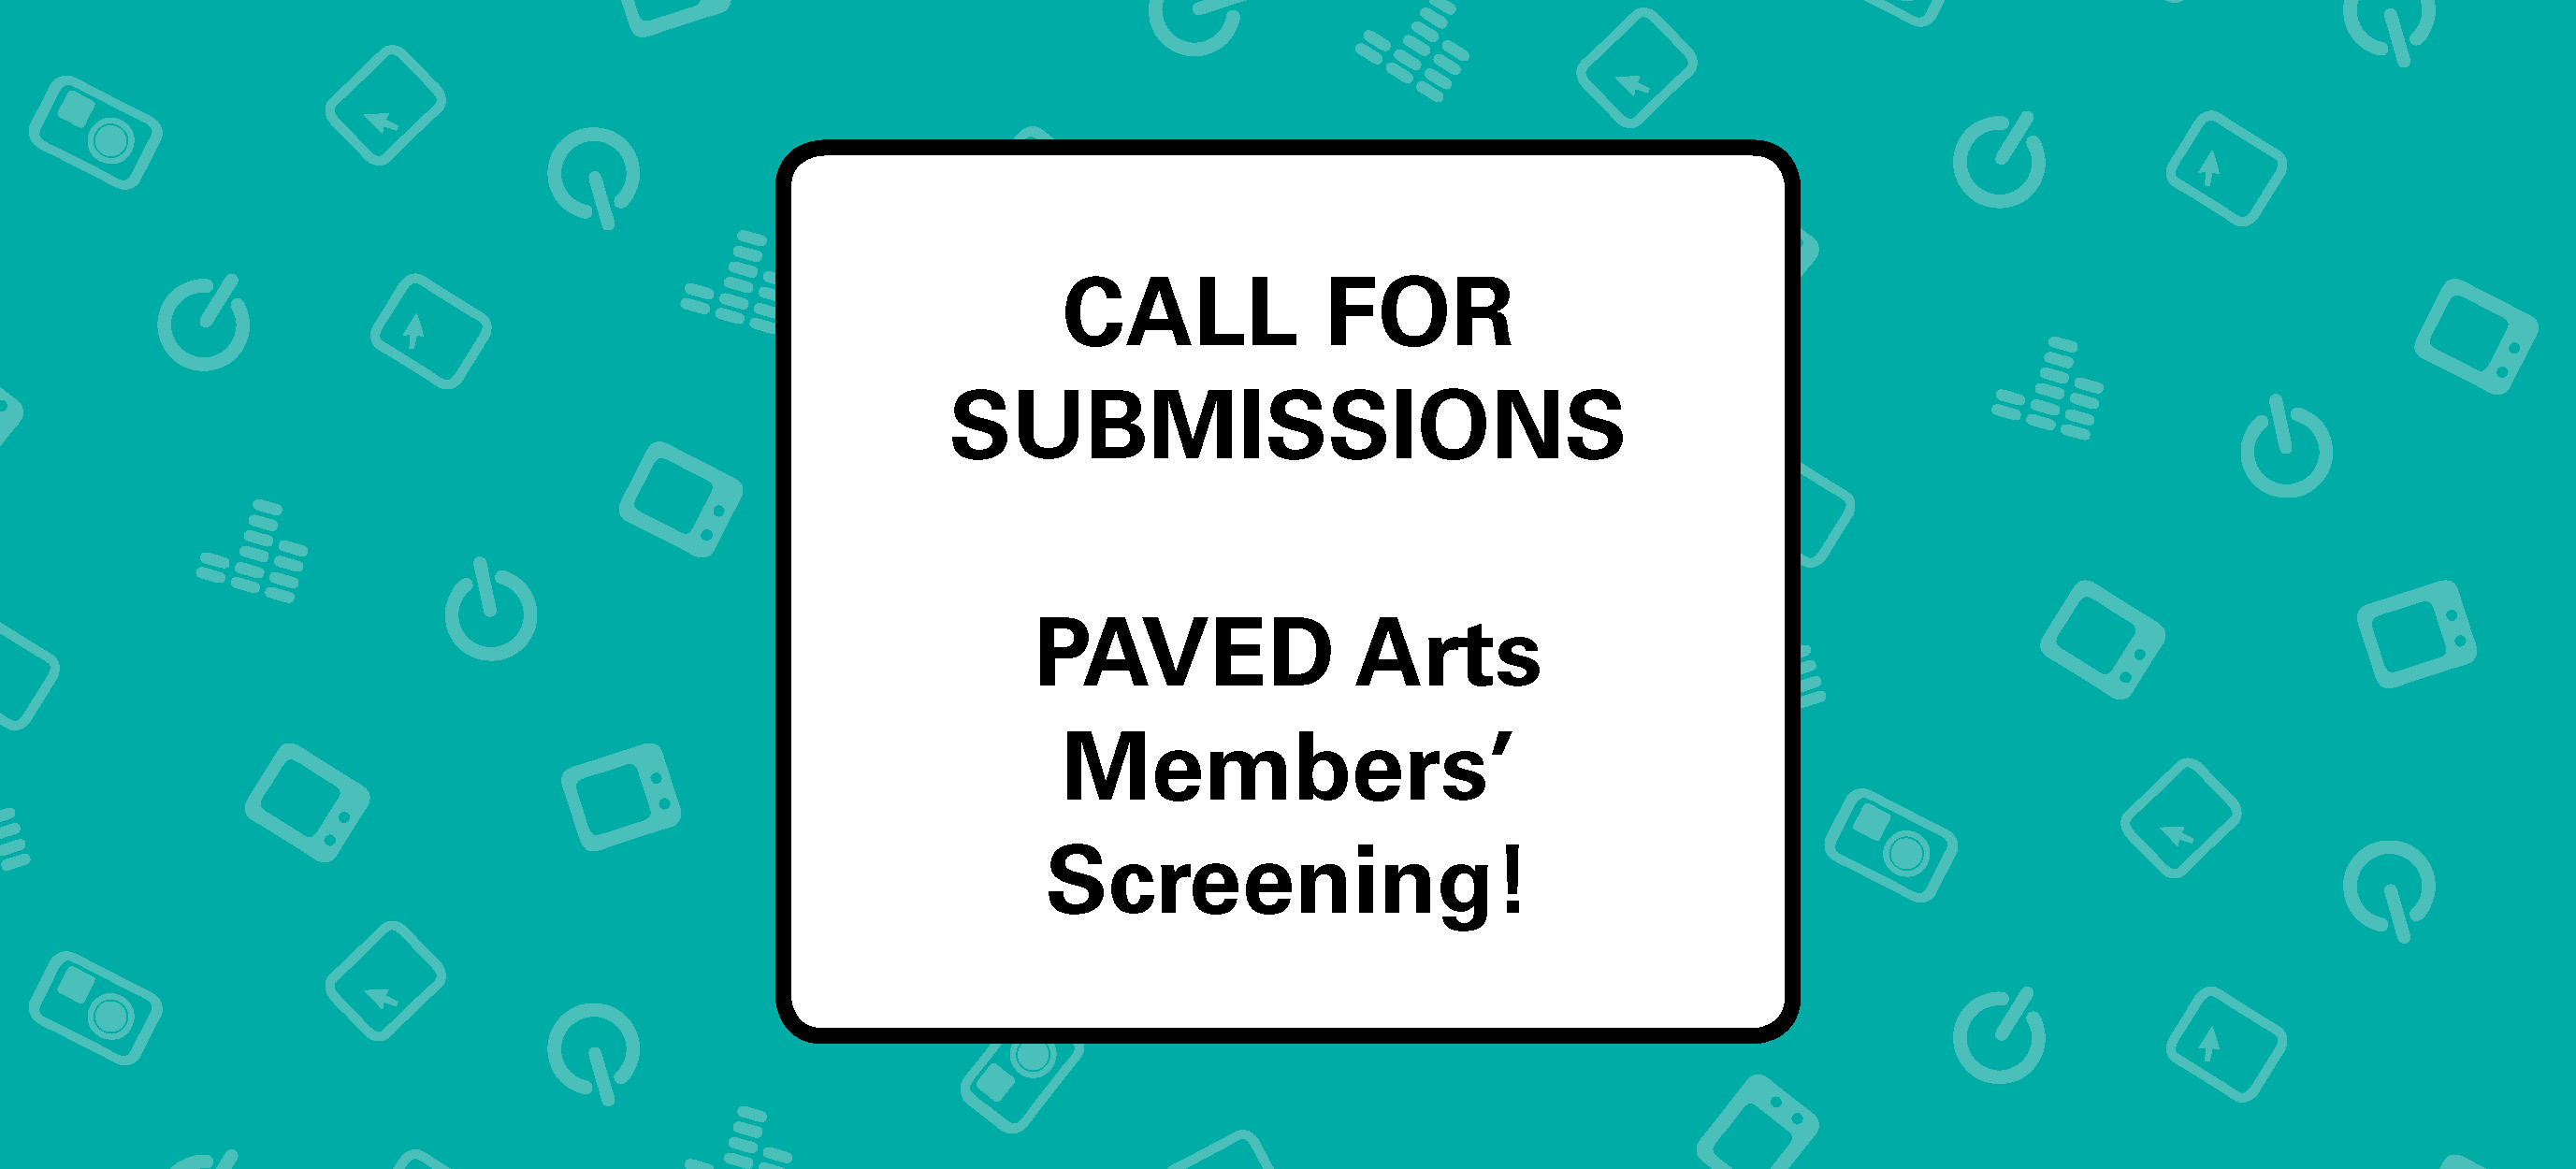 PAVED Arts Members’ Screening 2019: Call for Submissions